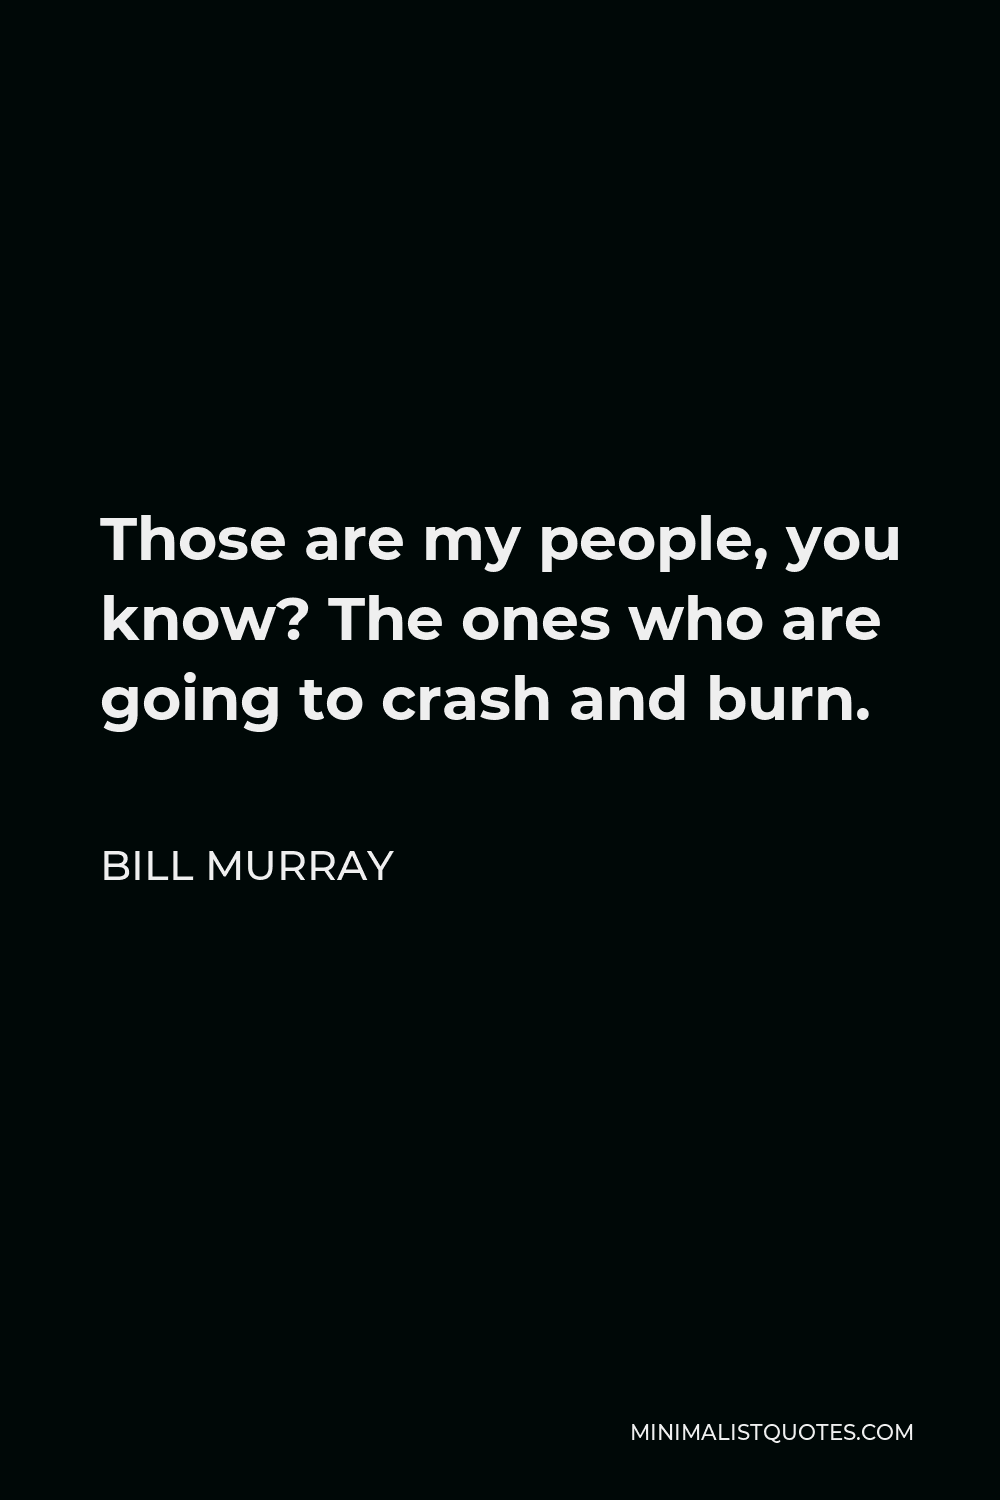 Bill Murray Quote - Those are my people, you know? The ones who are going to crash and burn.